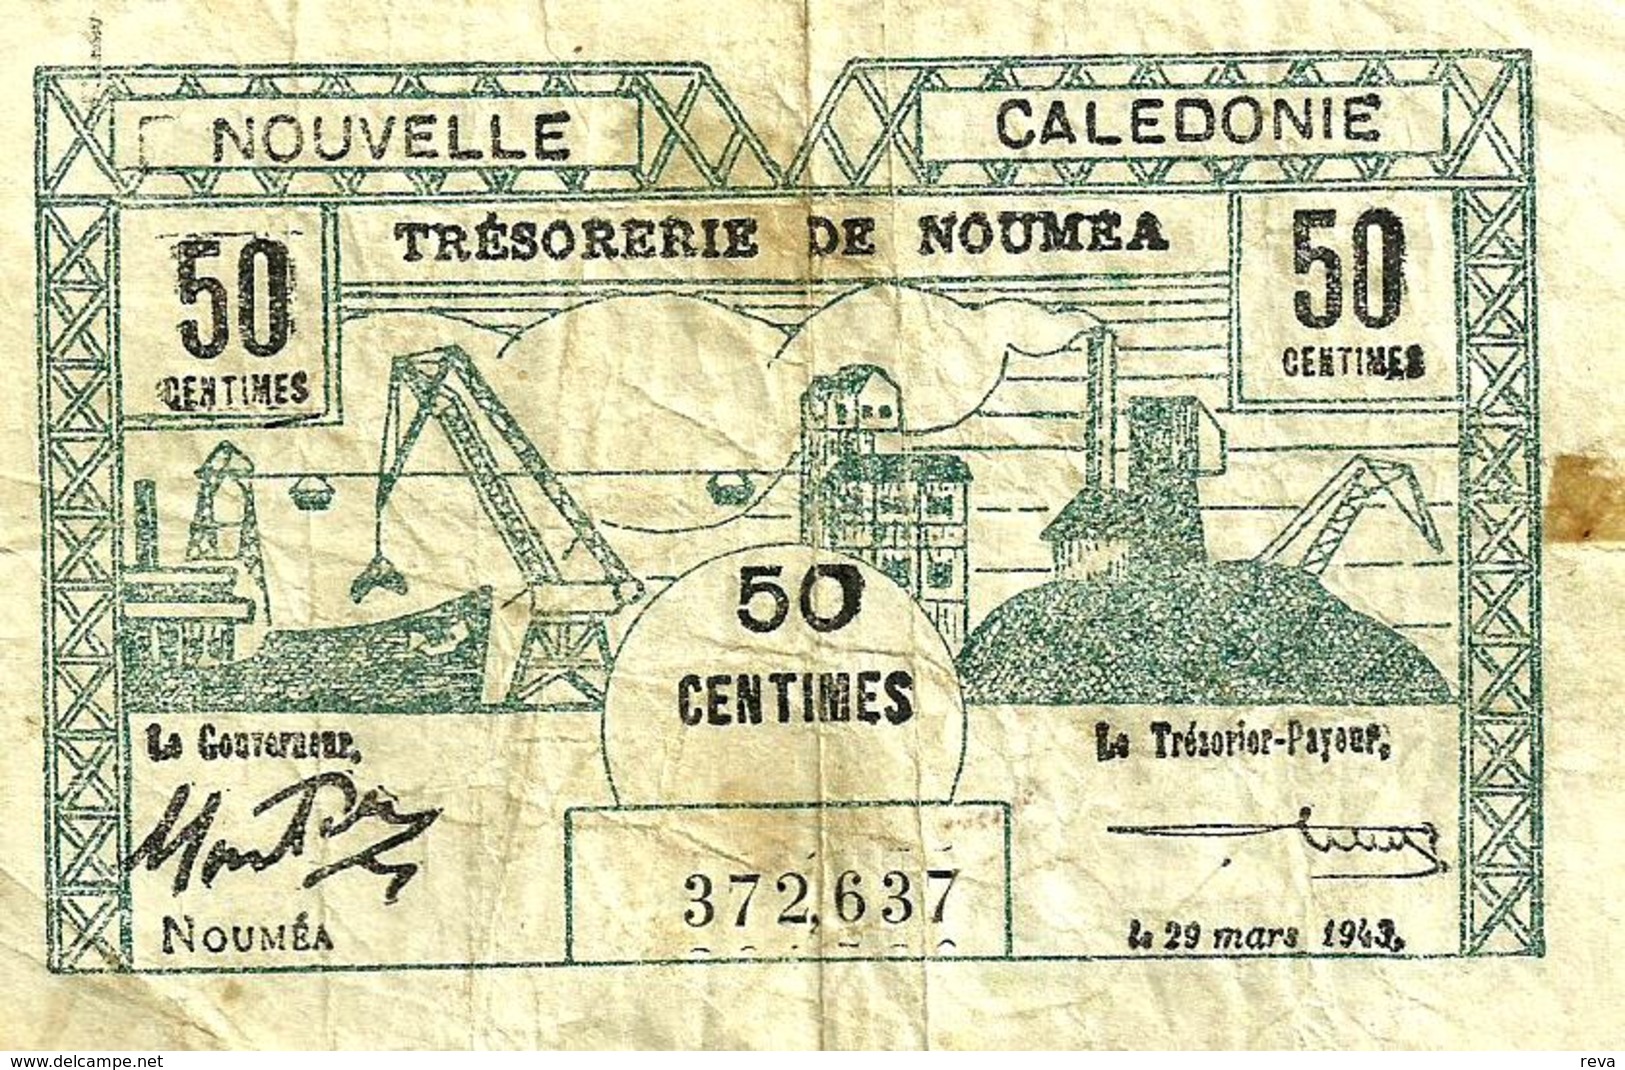 NEW CALEDONIA 50 CENTIMES MINE FRONT ANIMAL HEAD BACK WWII EMERGENCY ISSUE DATED 29-03-1943 P54 AVF READ DESCRIPTION!! - Nouvelle-Calédonie 1873-1985